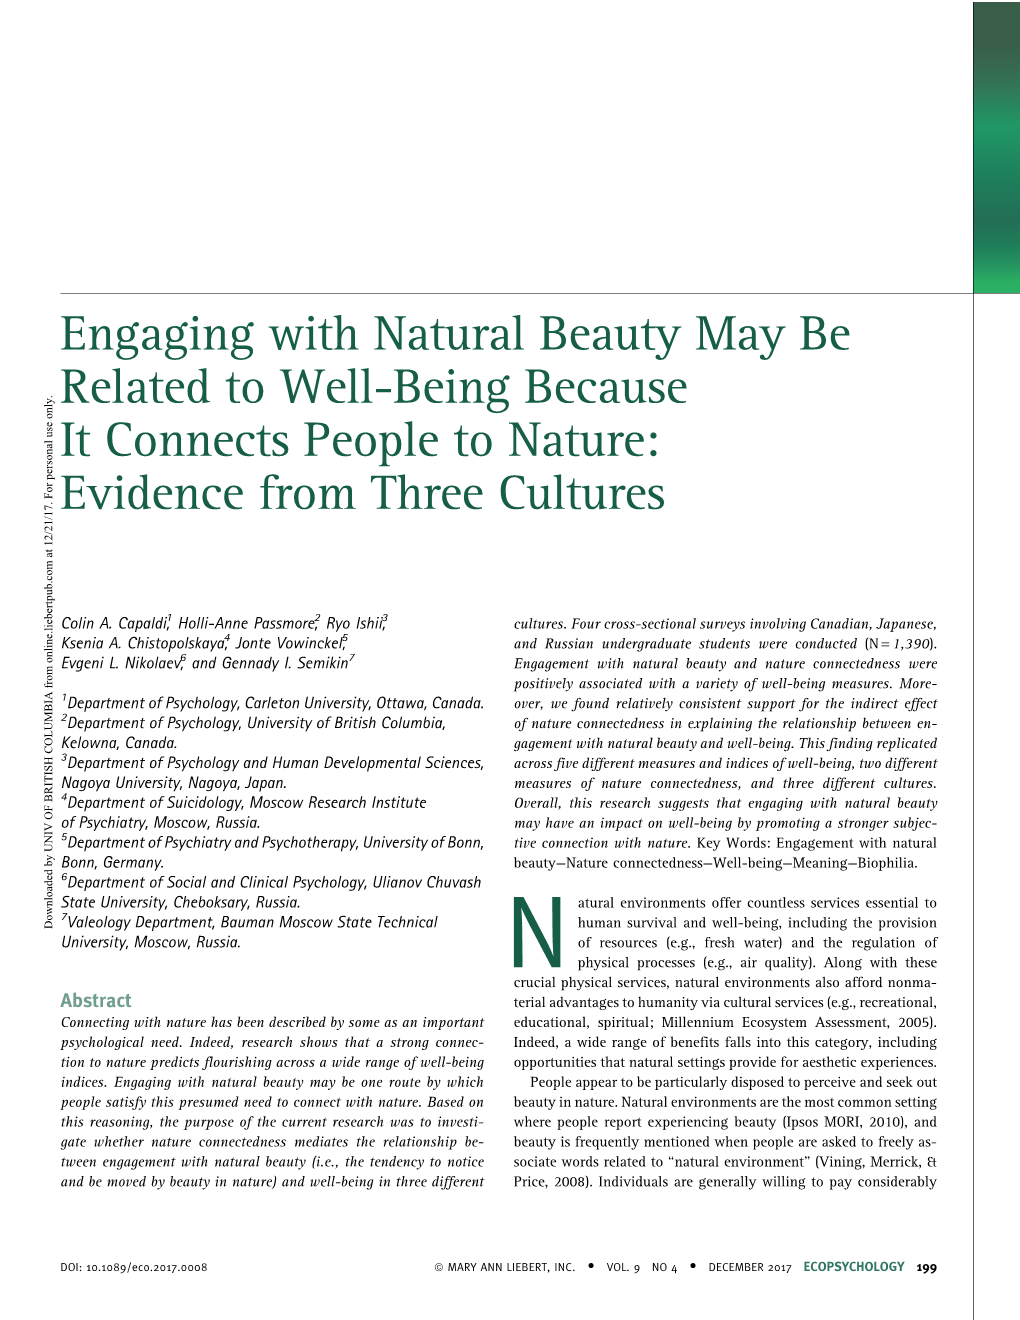 Engaging with Natural Beauty May Be Related to Well-Being Because It Connects People to Nature: Evidence from Three Cultures